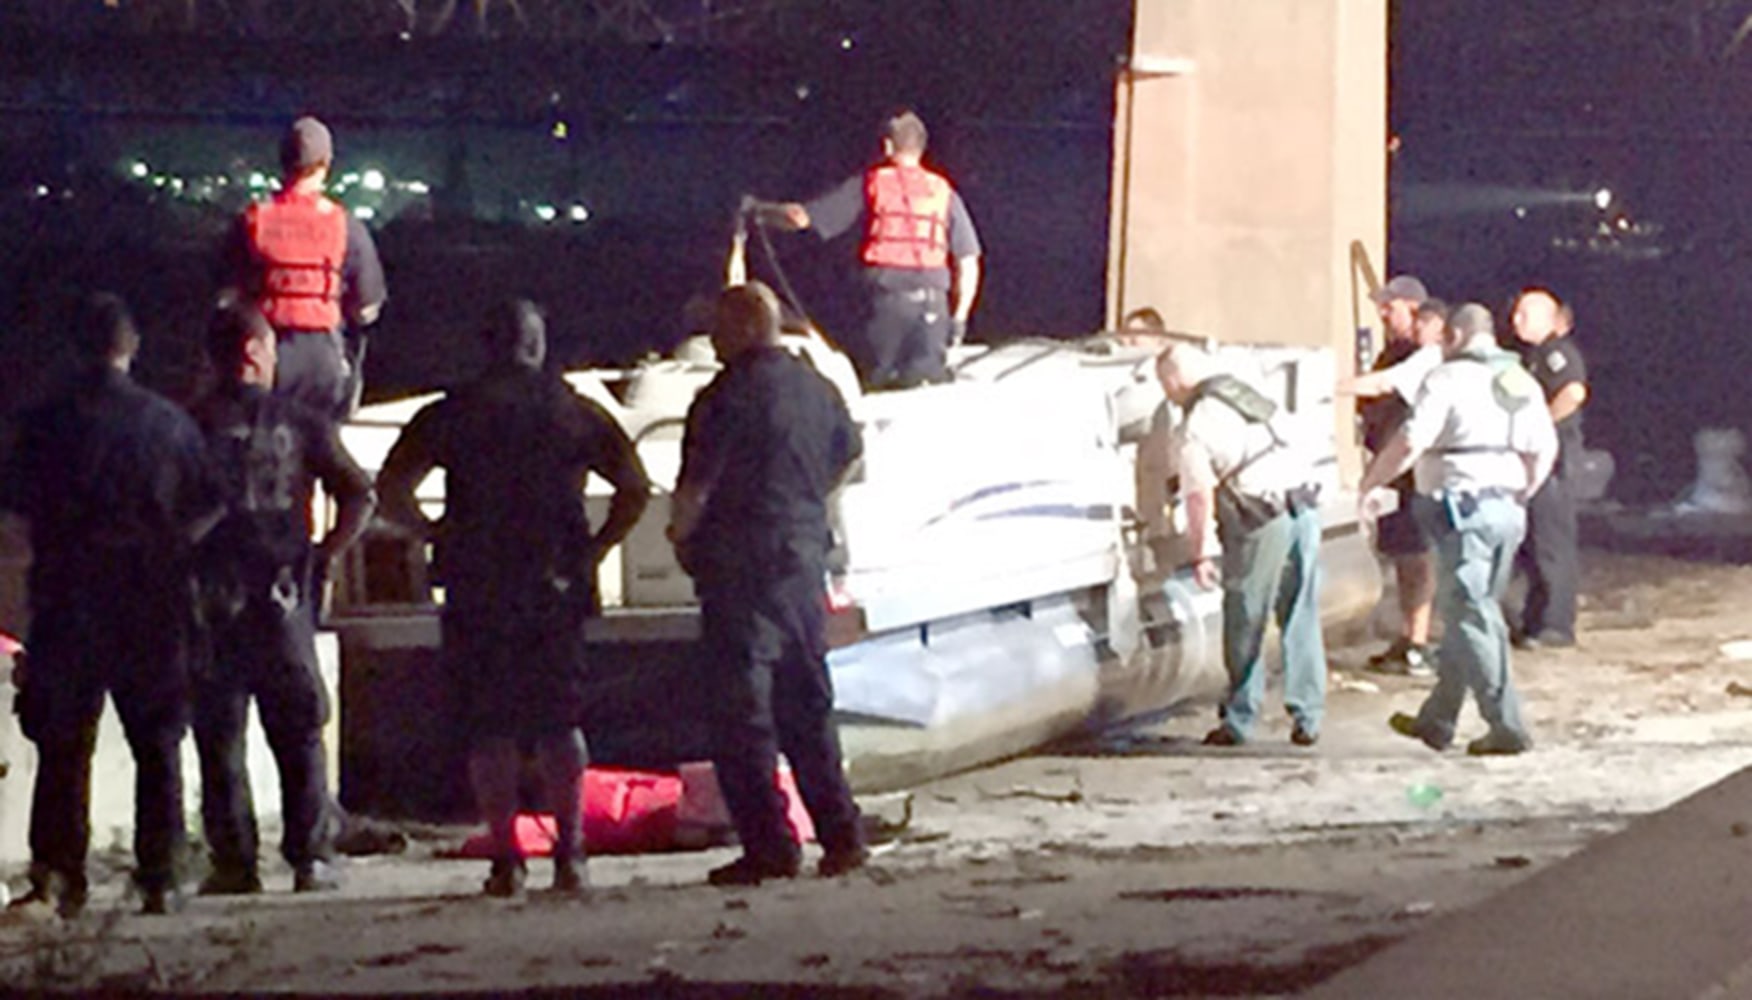 Ohio River Capsize: Two Dead, Search for Three Missing Continues - NBC News